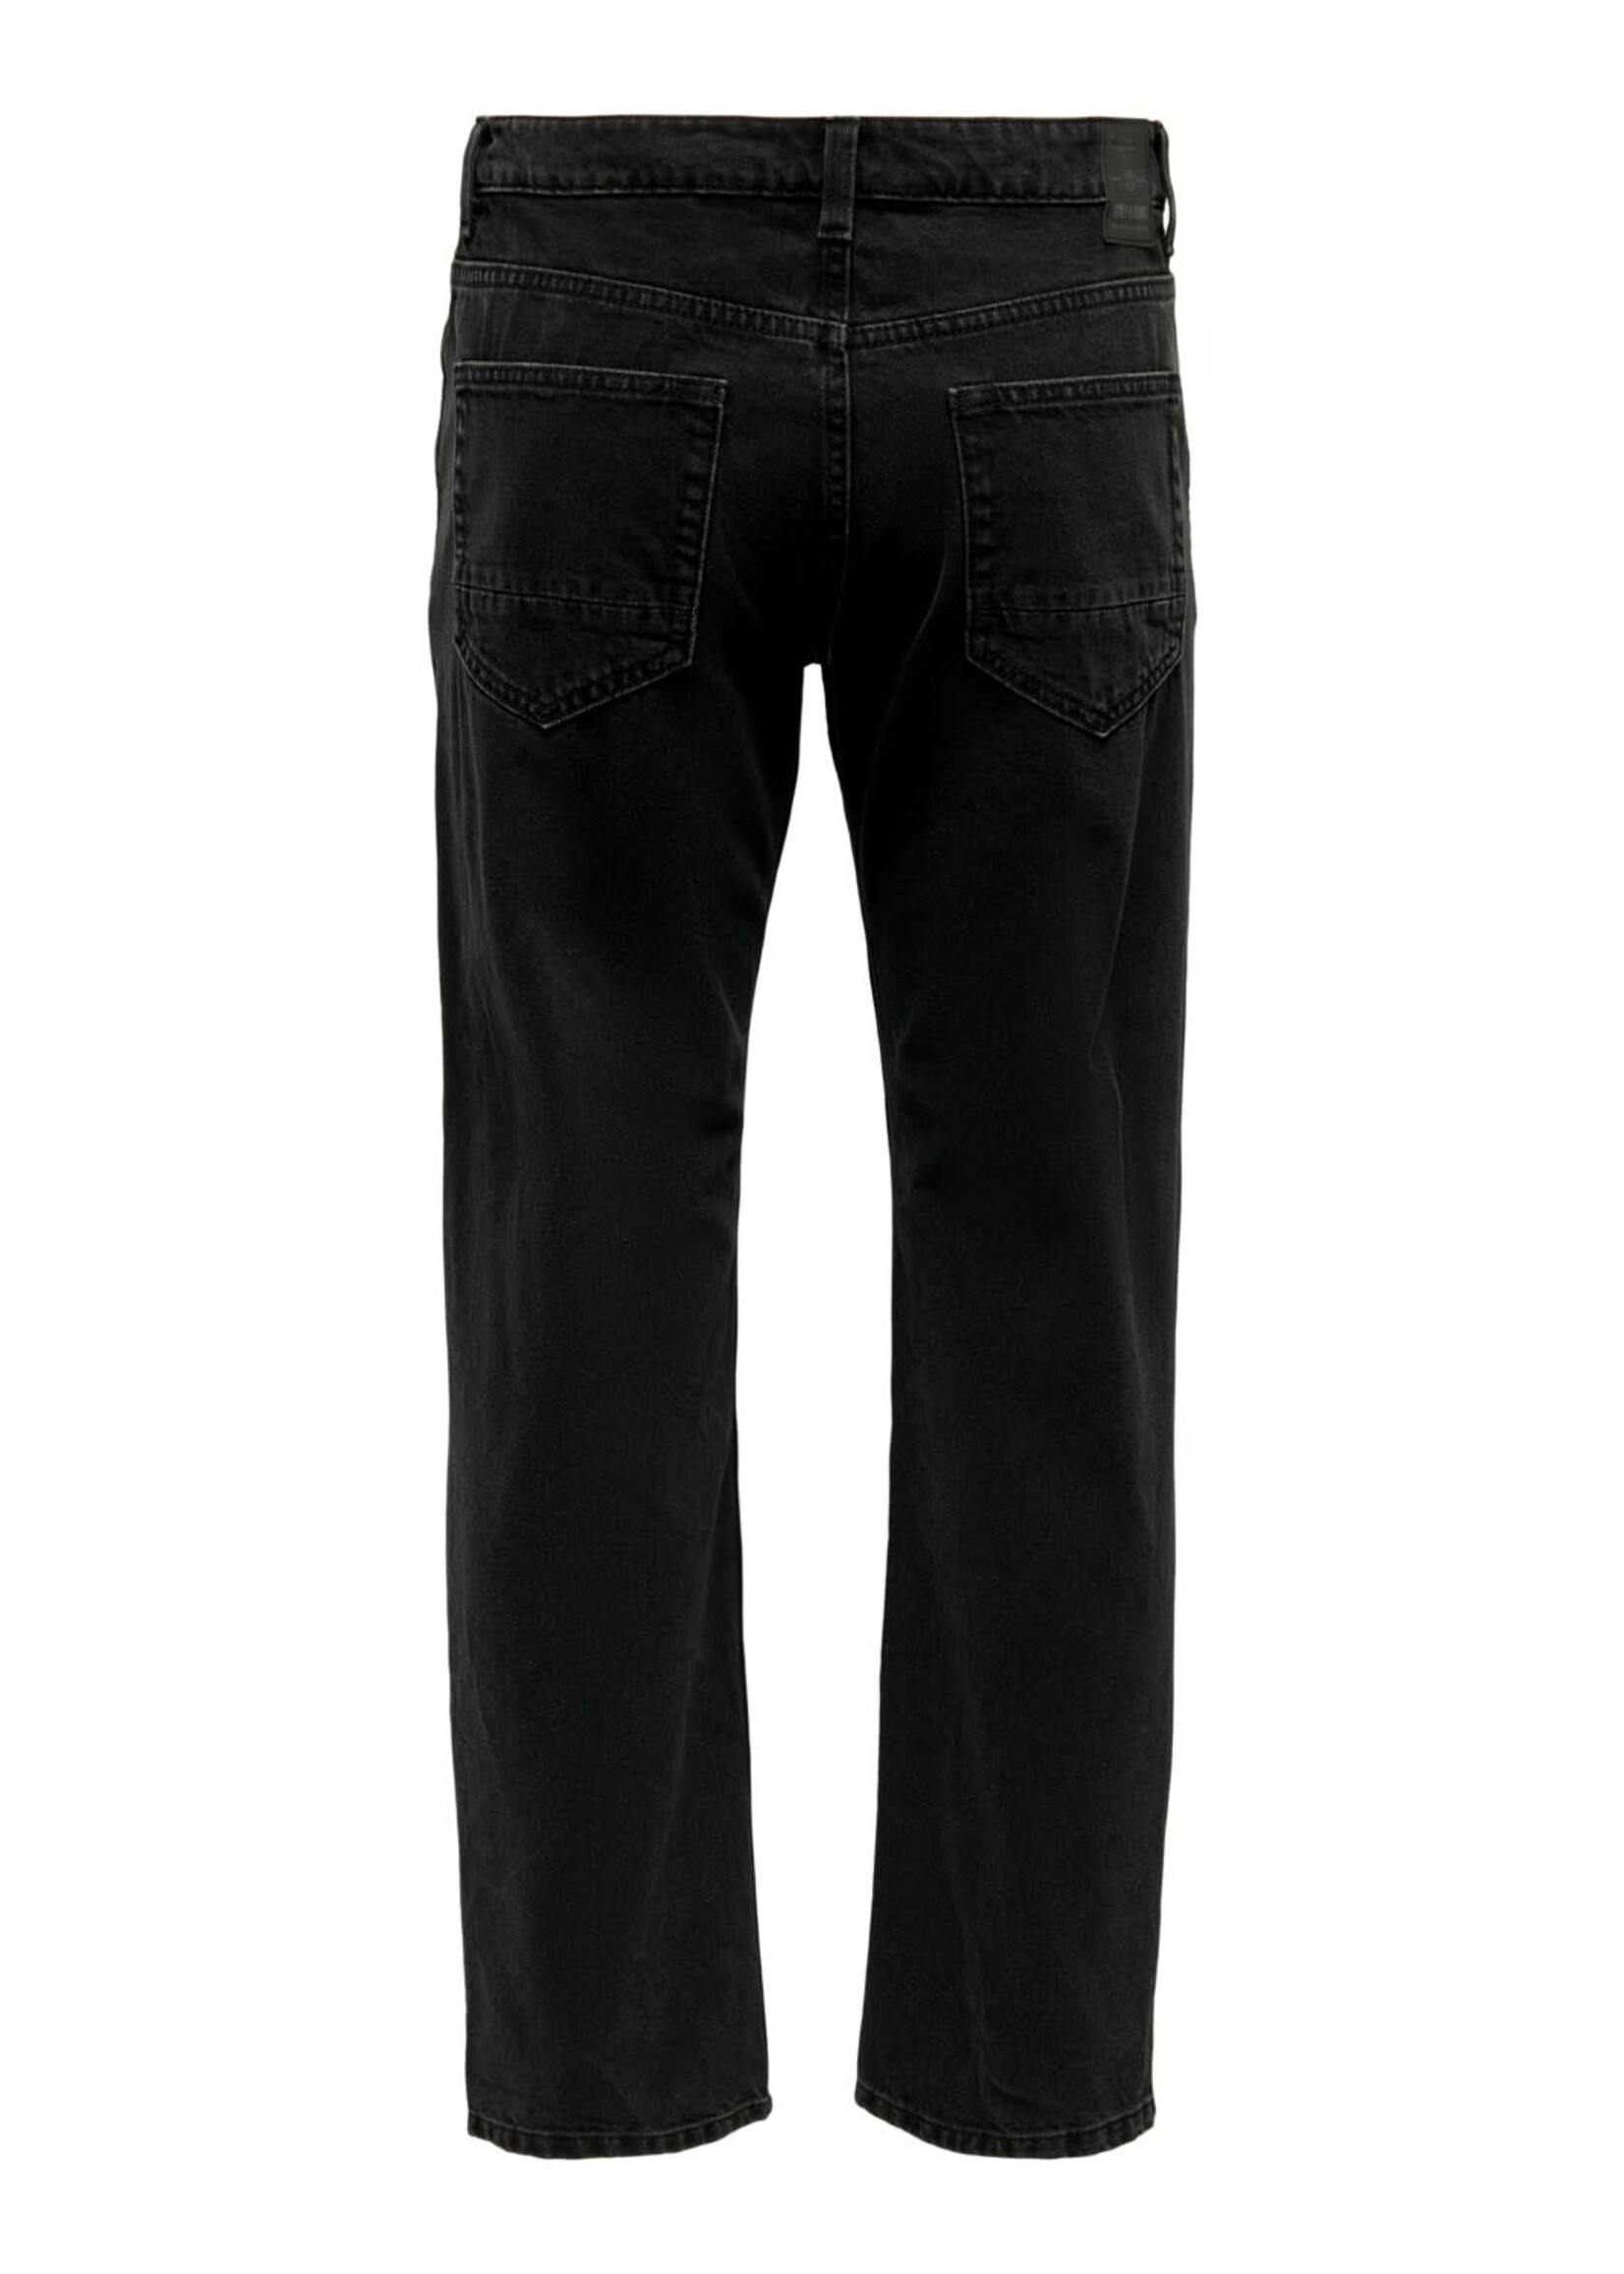 Only & Sons Edge Loose Black 2961 Jeans